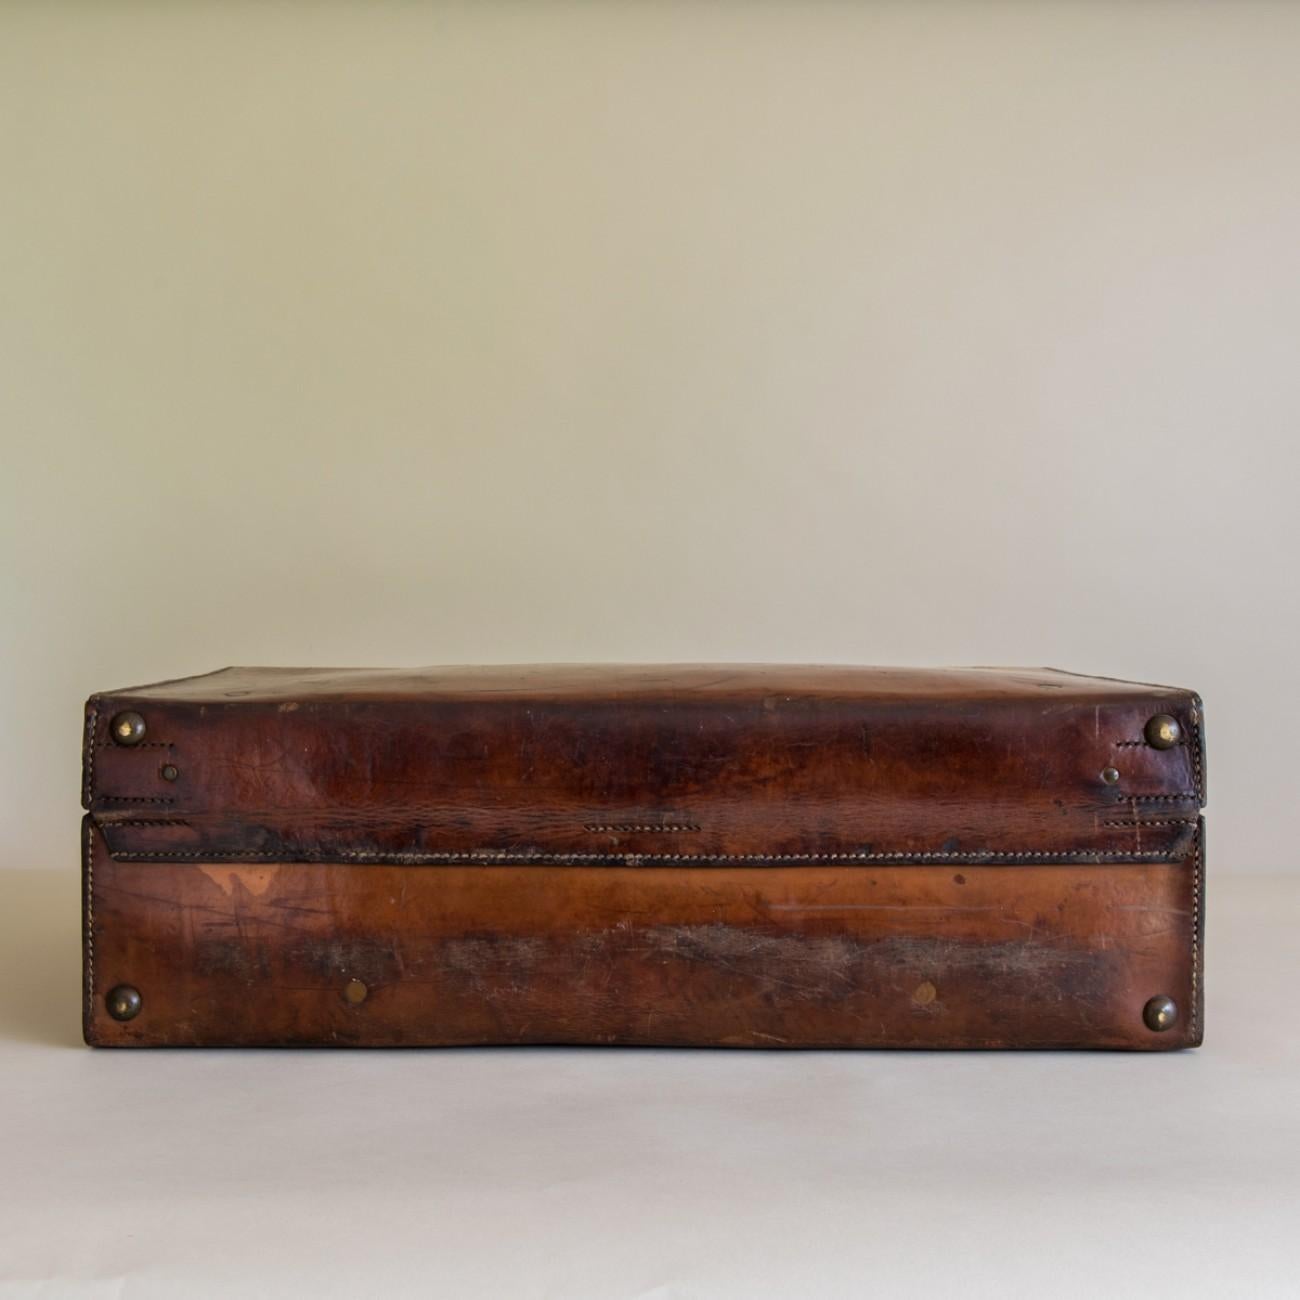 Early 20th Century Tan Leather Suitcase, circa 1900.